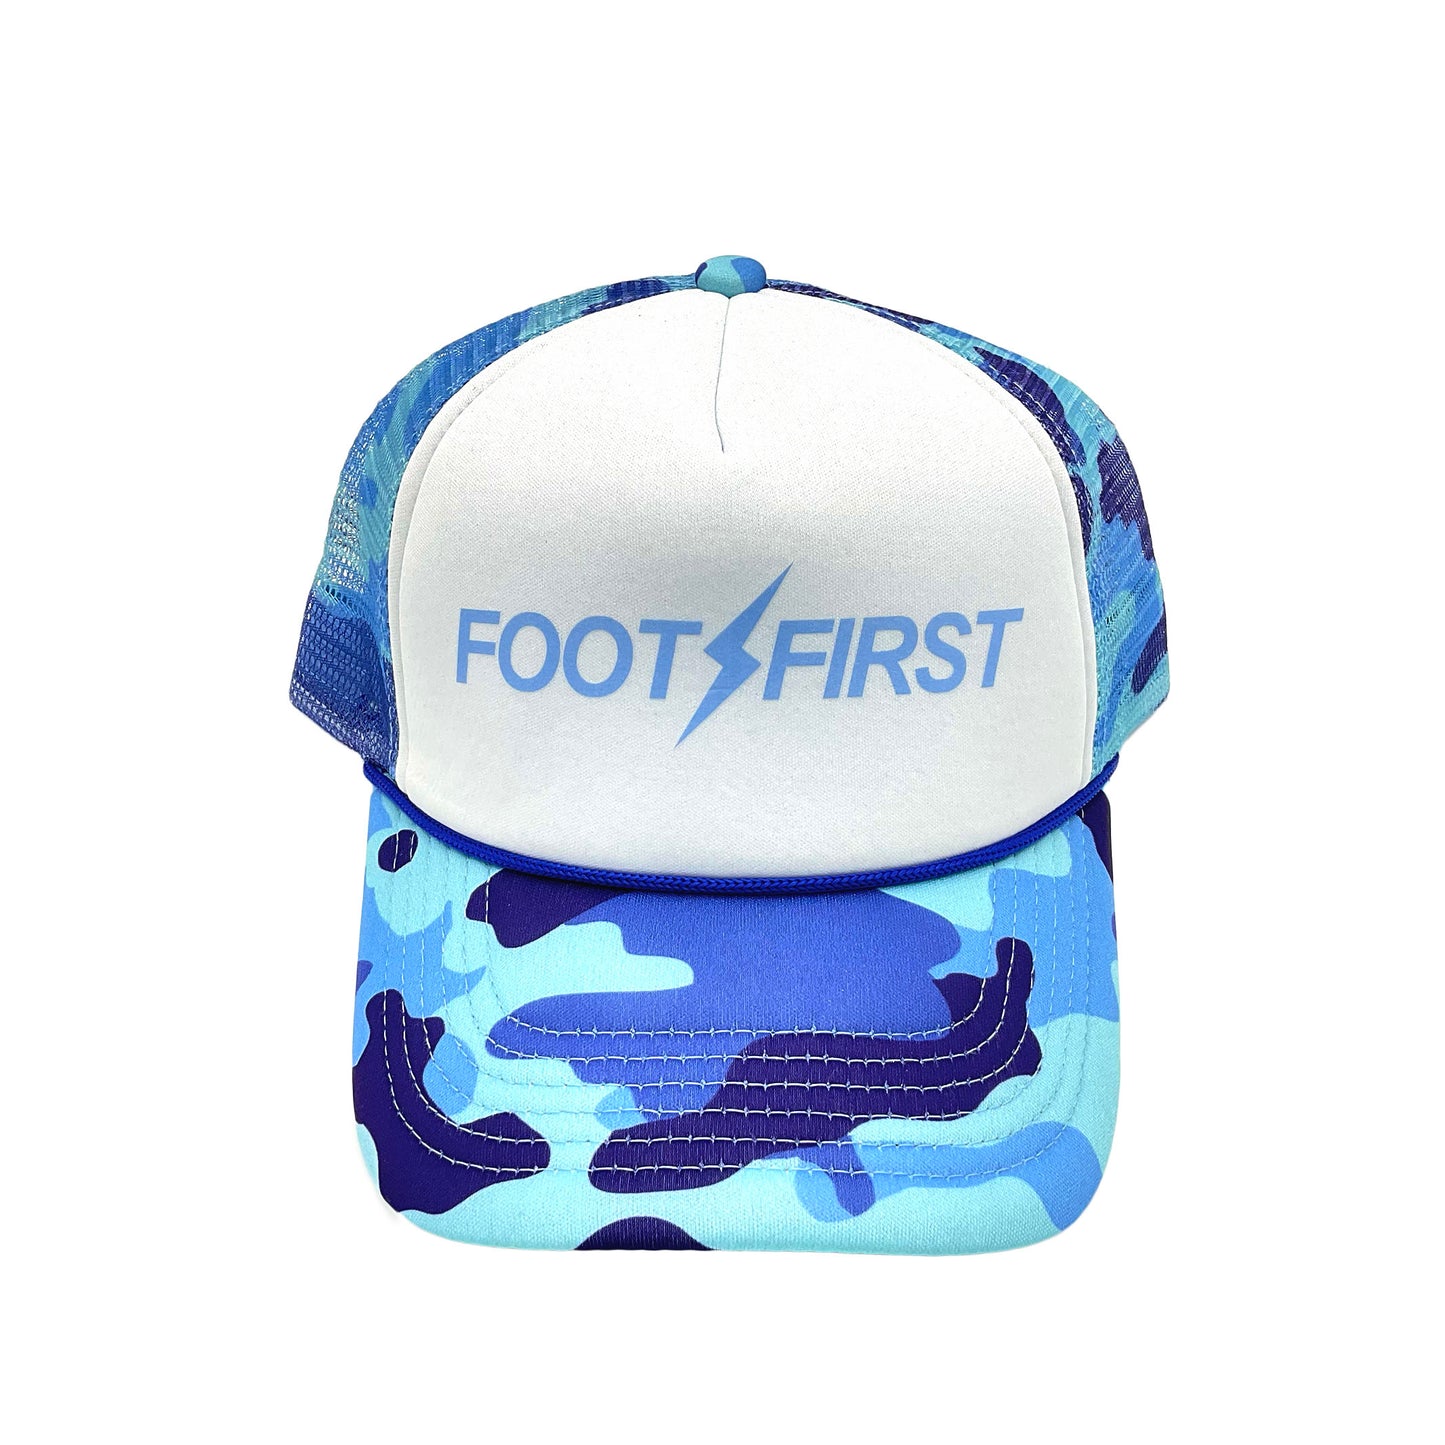 FOOT FIRST CLASSIC LOGO COLOR CAMO LIMITED EDITION MESH CAP